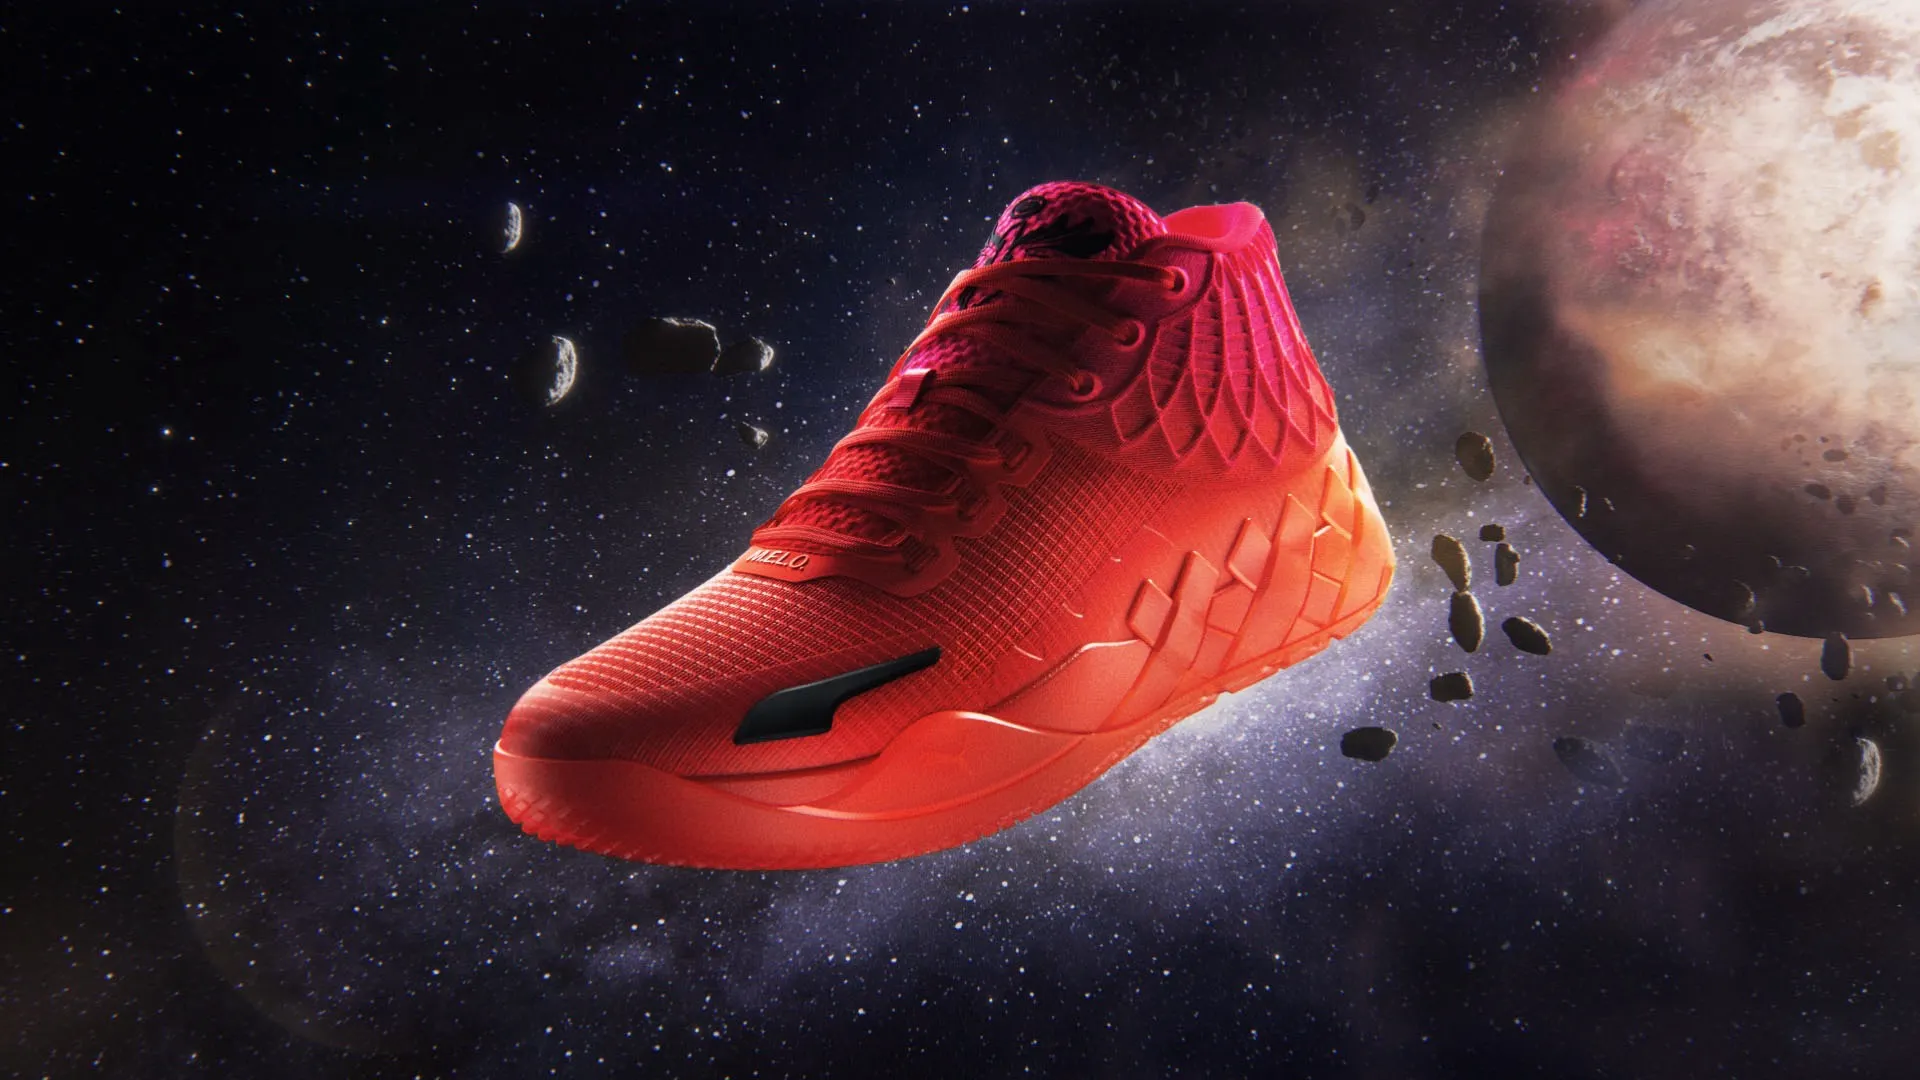 3D product visualization of a basketball shoe suspended against a 3D backdrop of outerspace. Asteroid debris are flying by the rear of the shoe while a separate 3D model of a planet can be seen in the upper right corner of the backdrop.